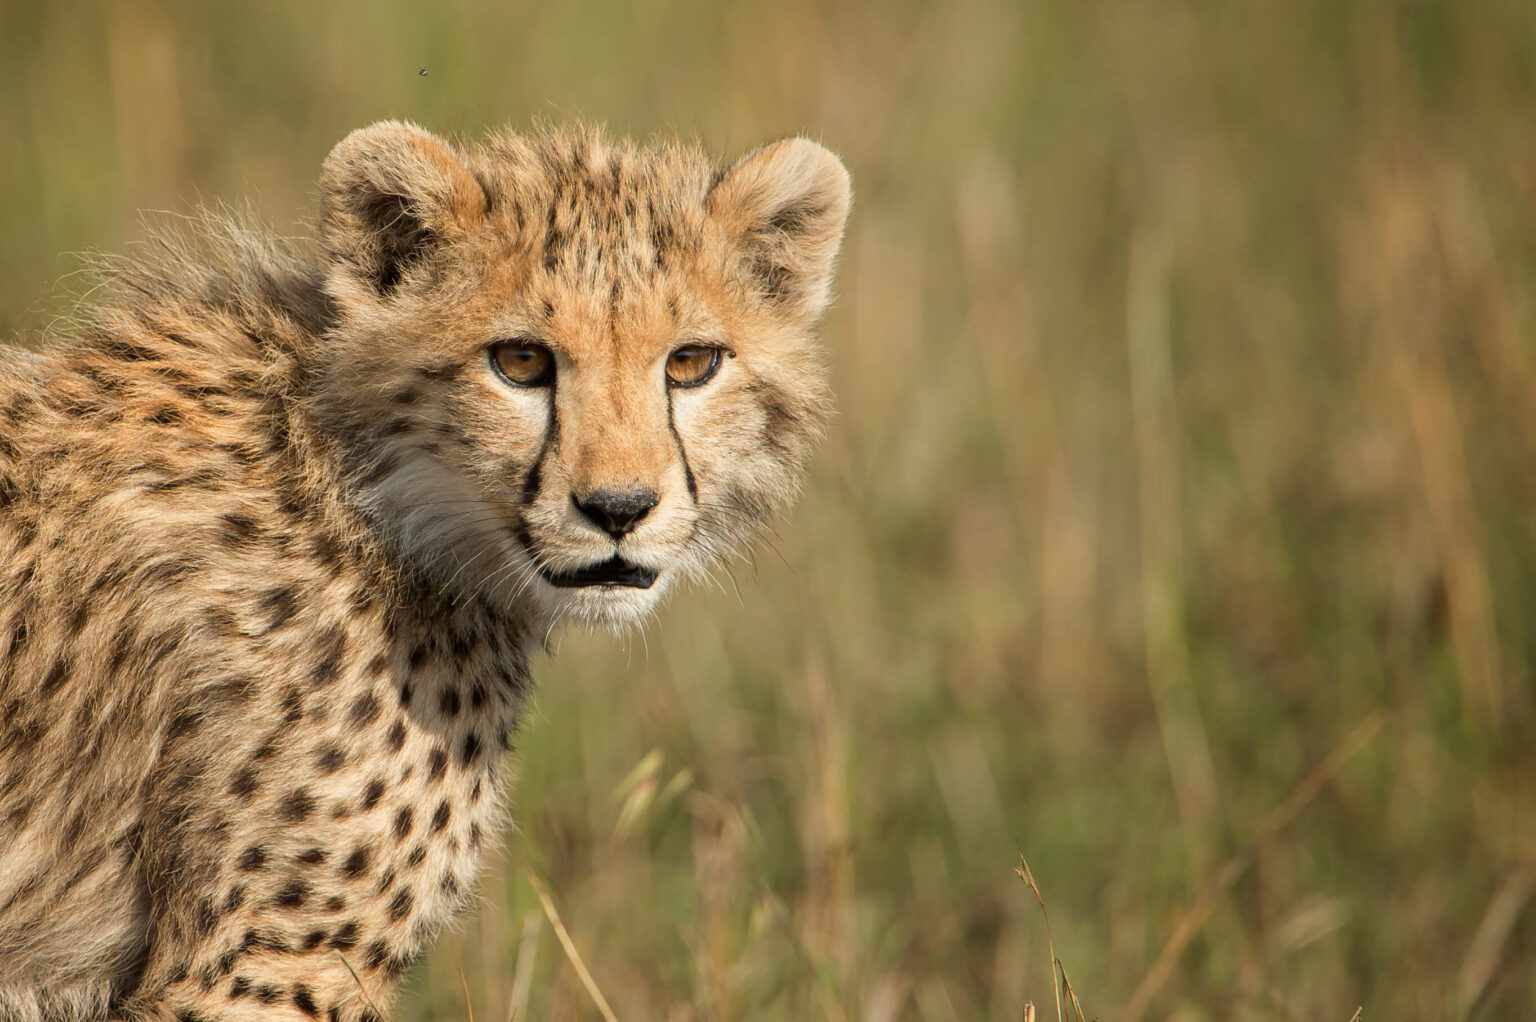 A young adult Cheetah in the Serengeti in Tanzania